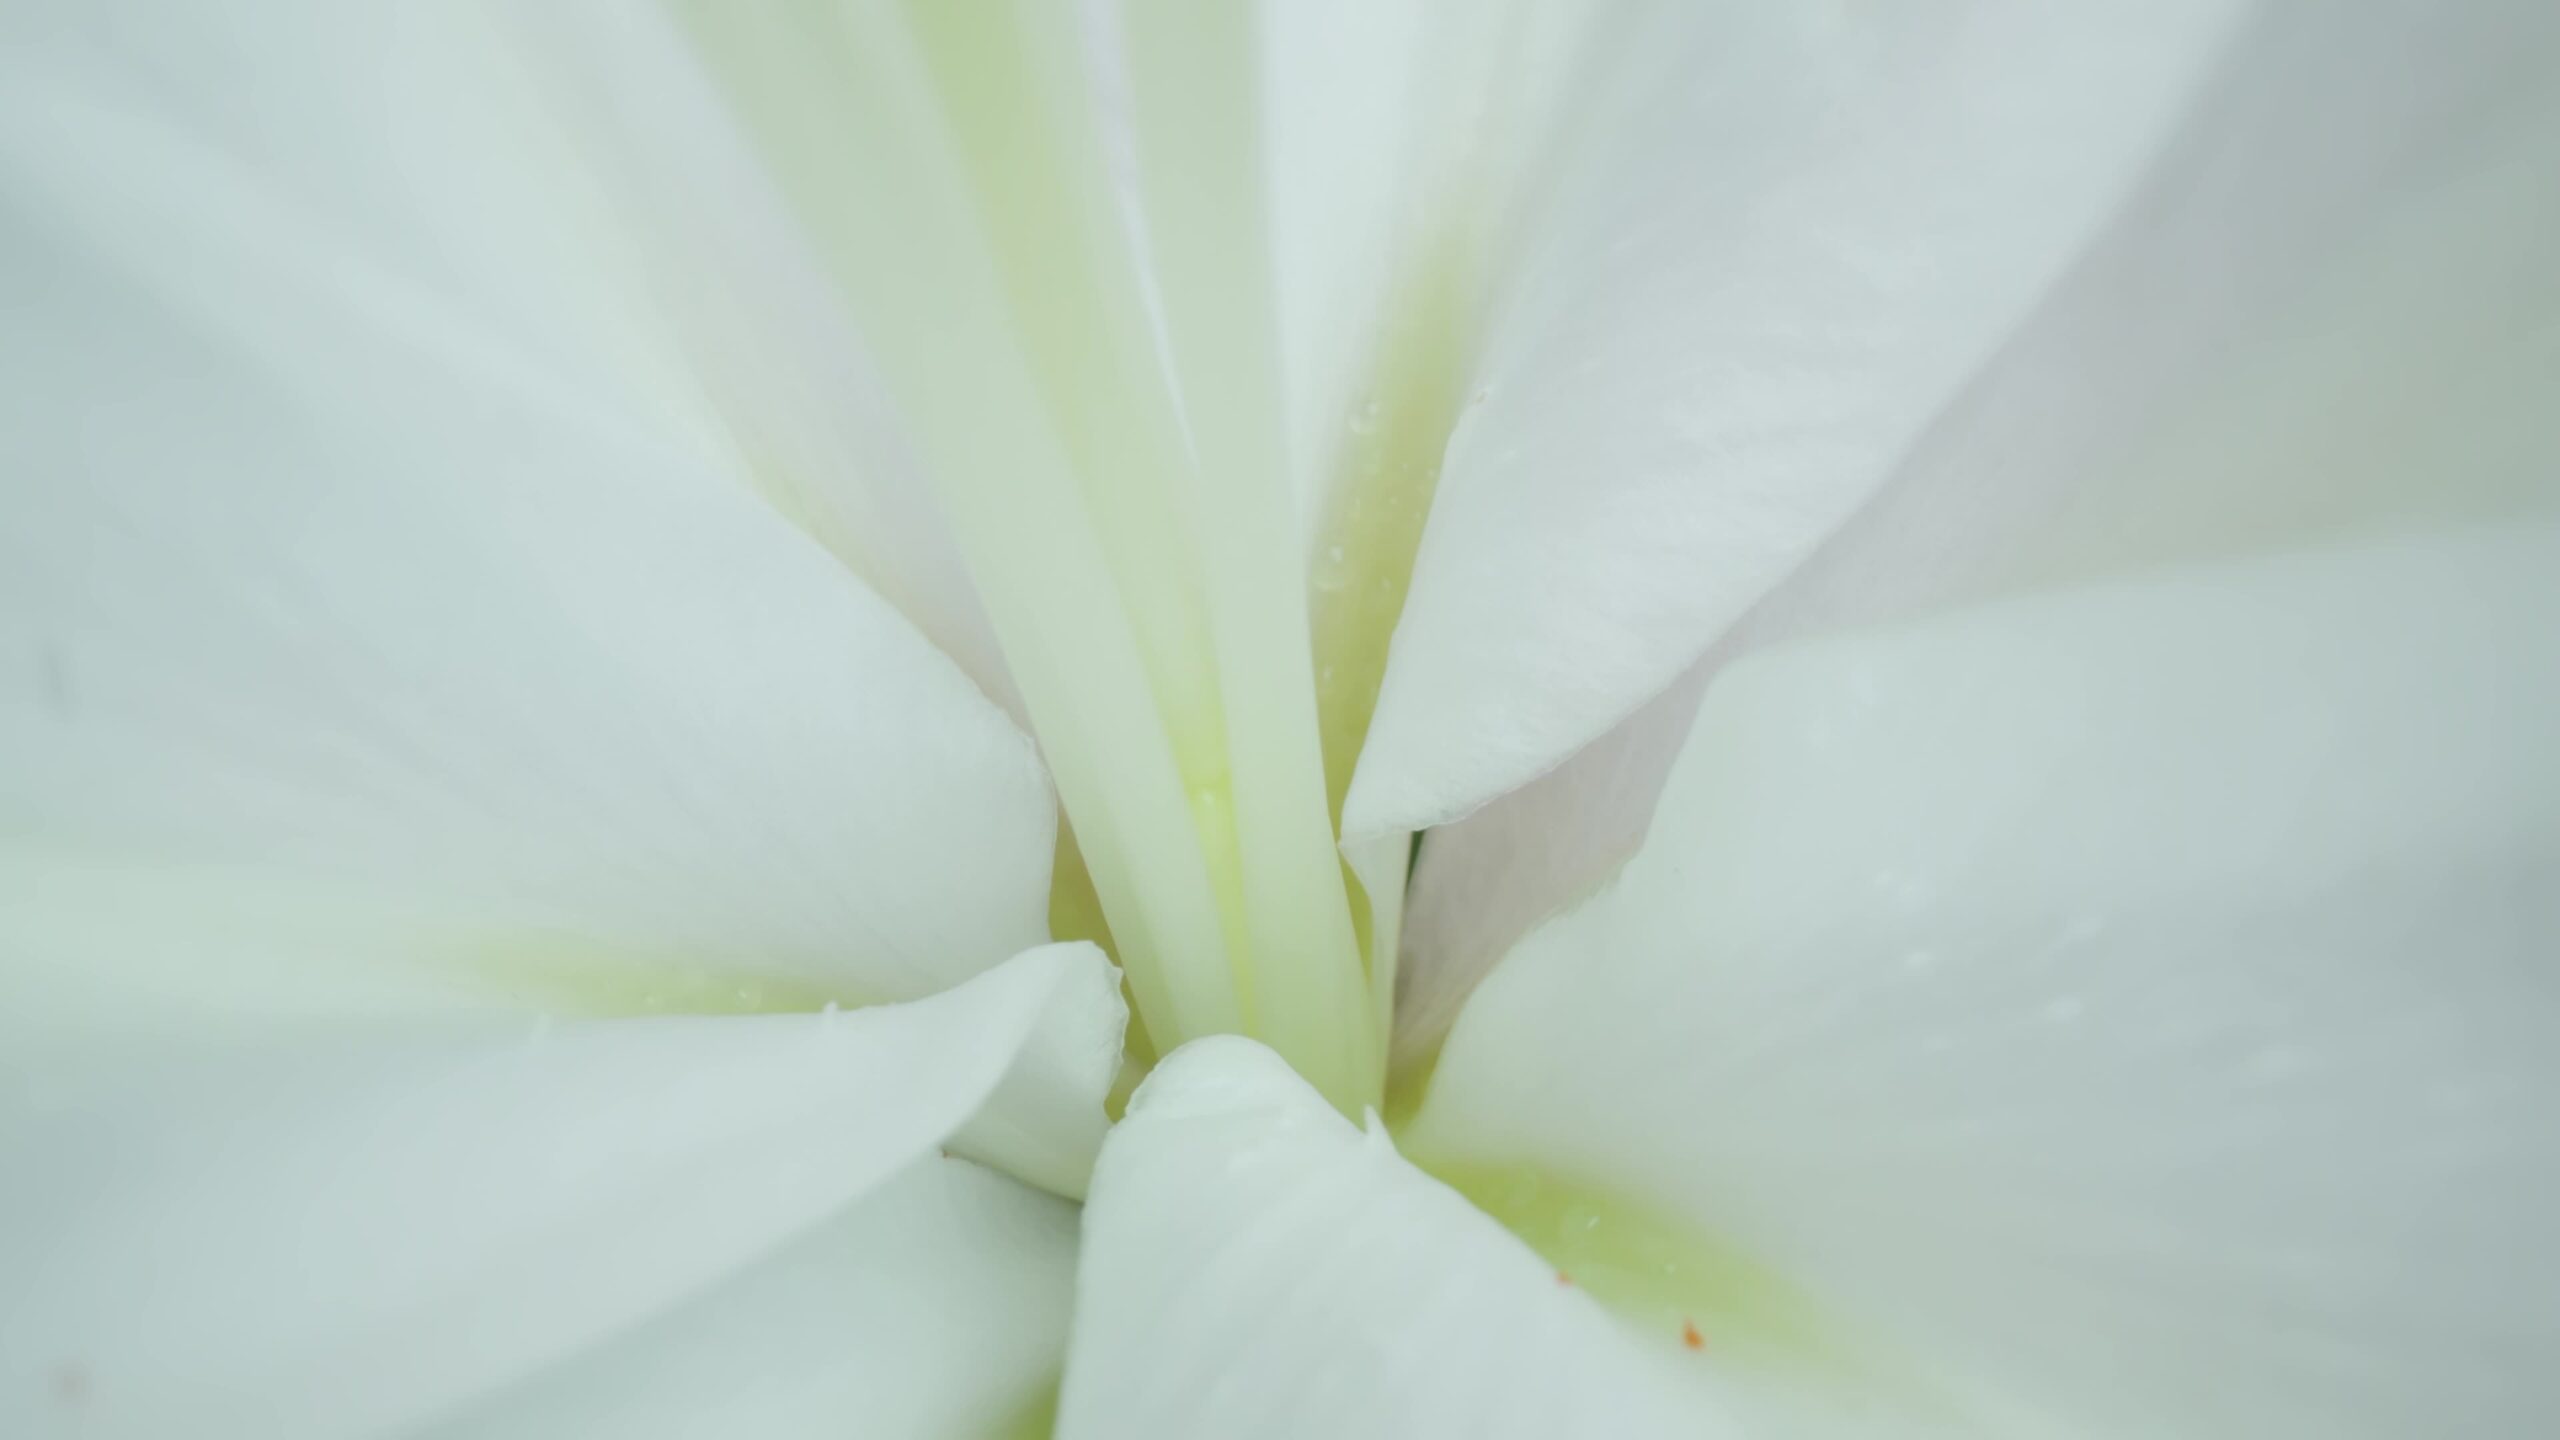 White lily petals with red pollen inside among greenery